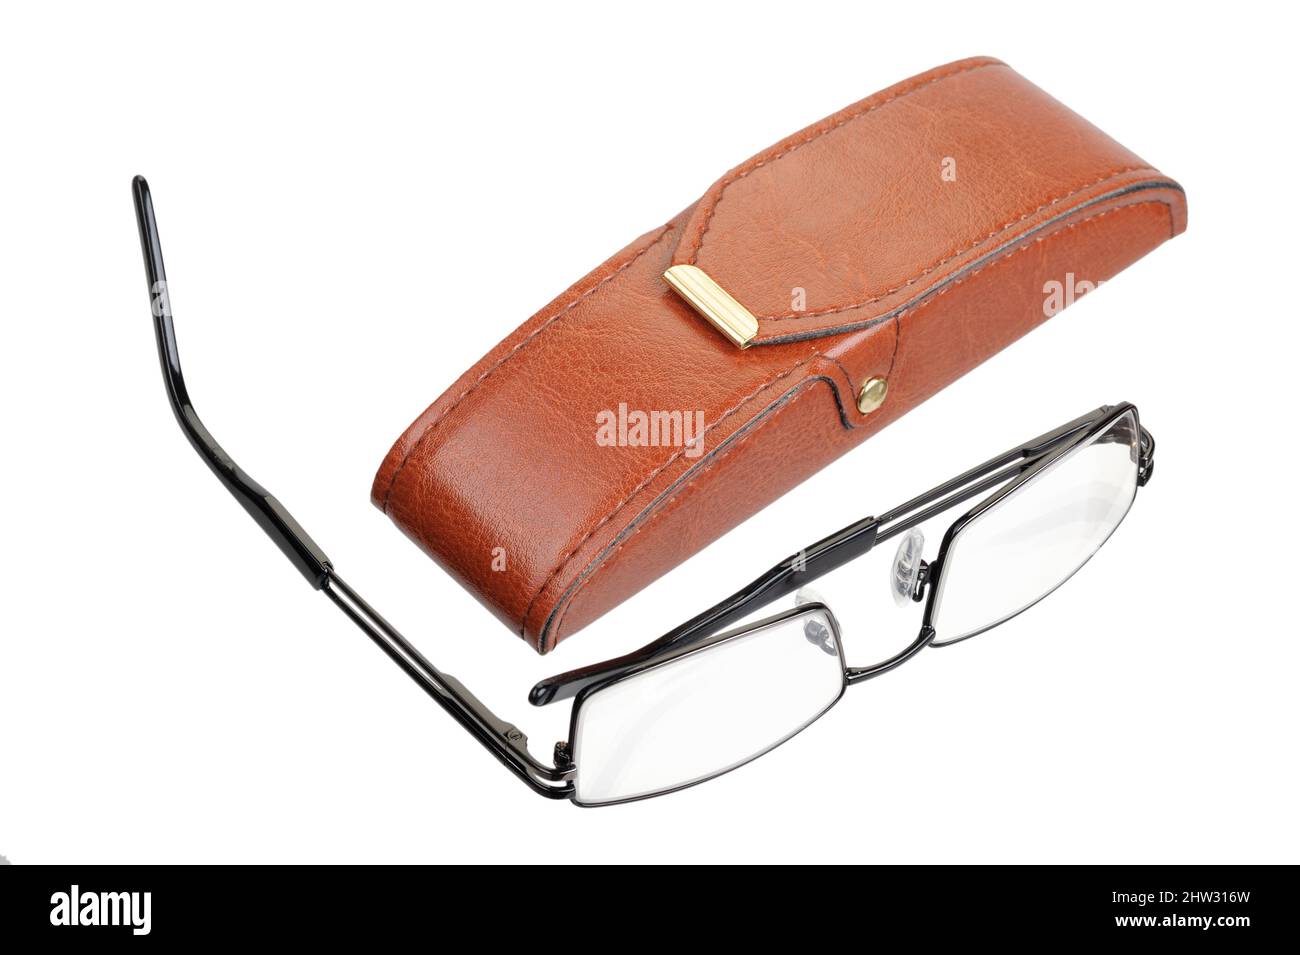 Eyeglasses lying on the glass surface and their reflections Stock Photo